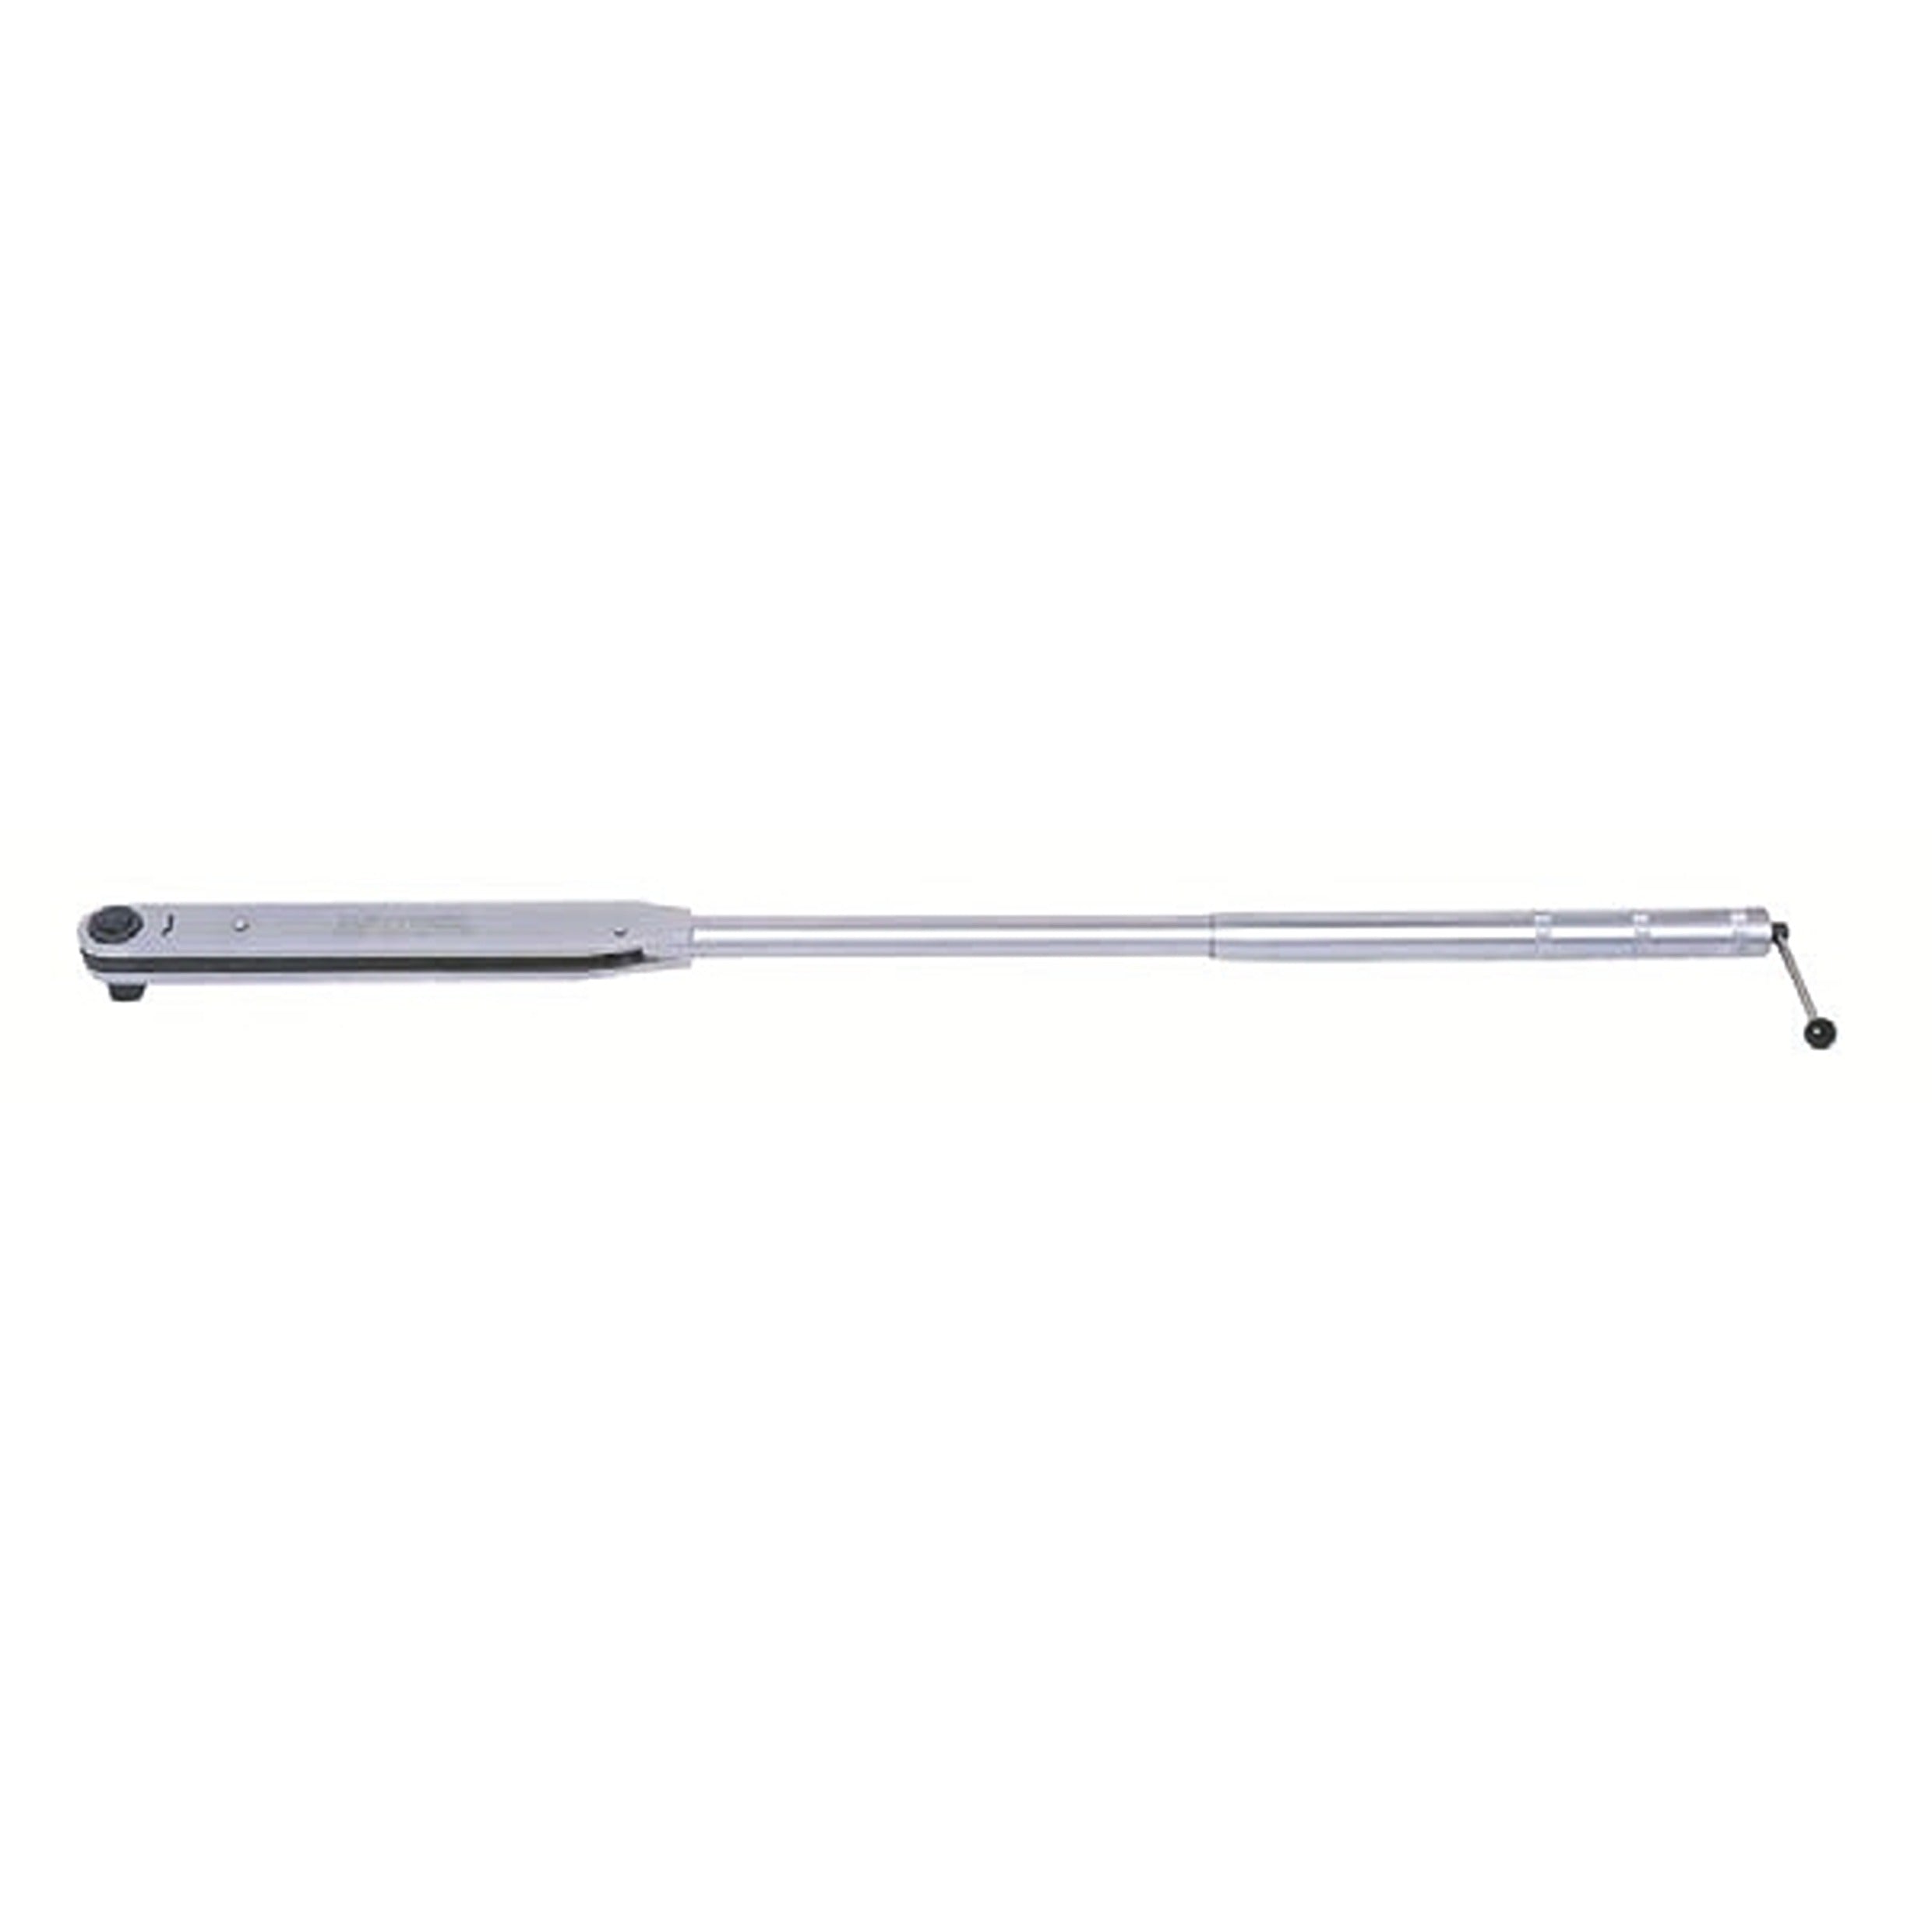 BRITOOL HVT5000 3/4" Torque Wrench Classic Mechanical 140-560 Nm - Premium 3/4" Torque Wrench from BRITOOL - Shop now at Yew Aik.